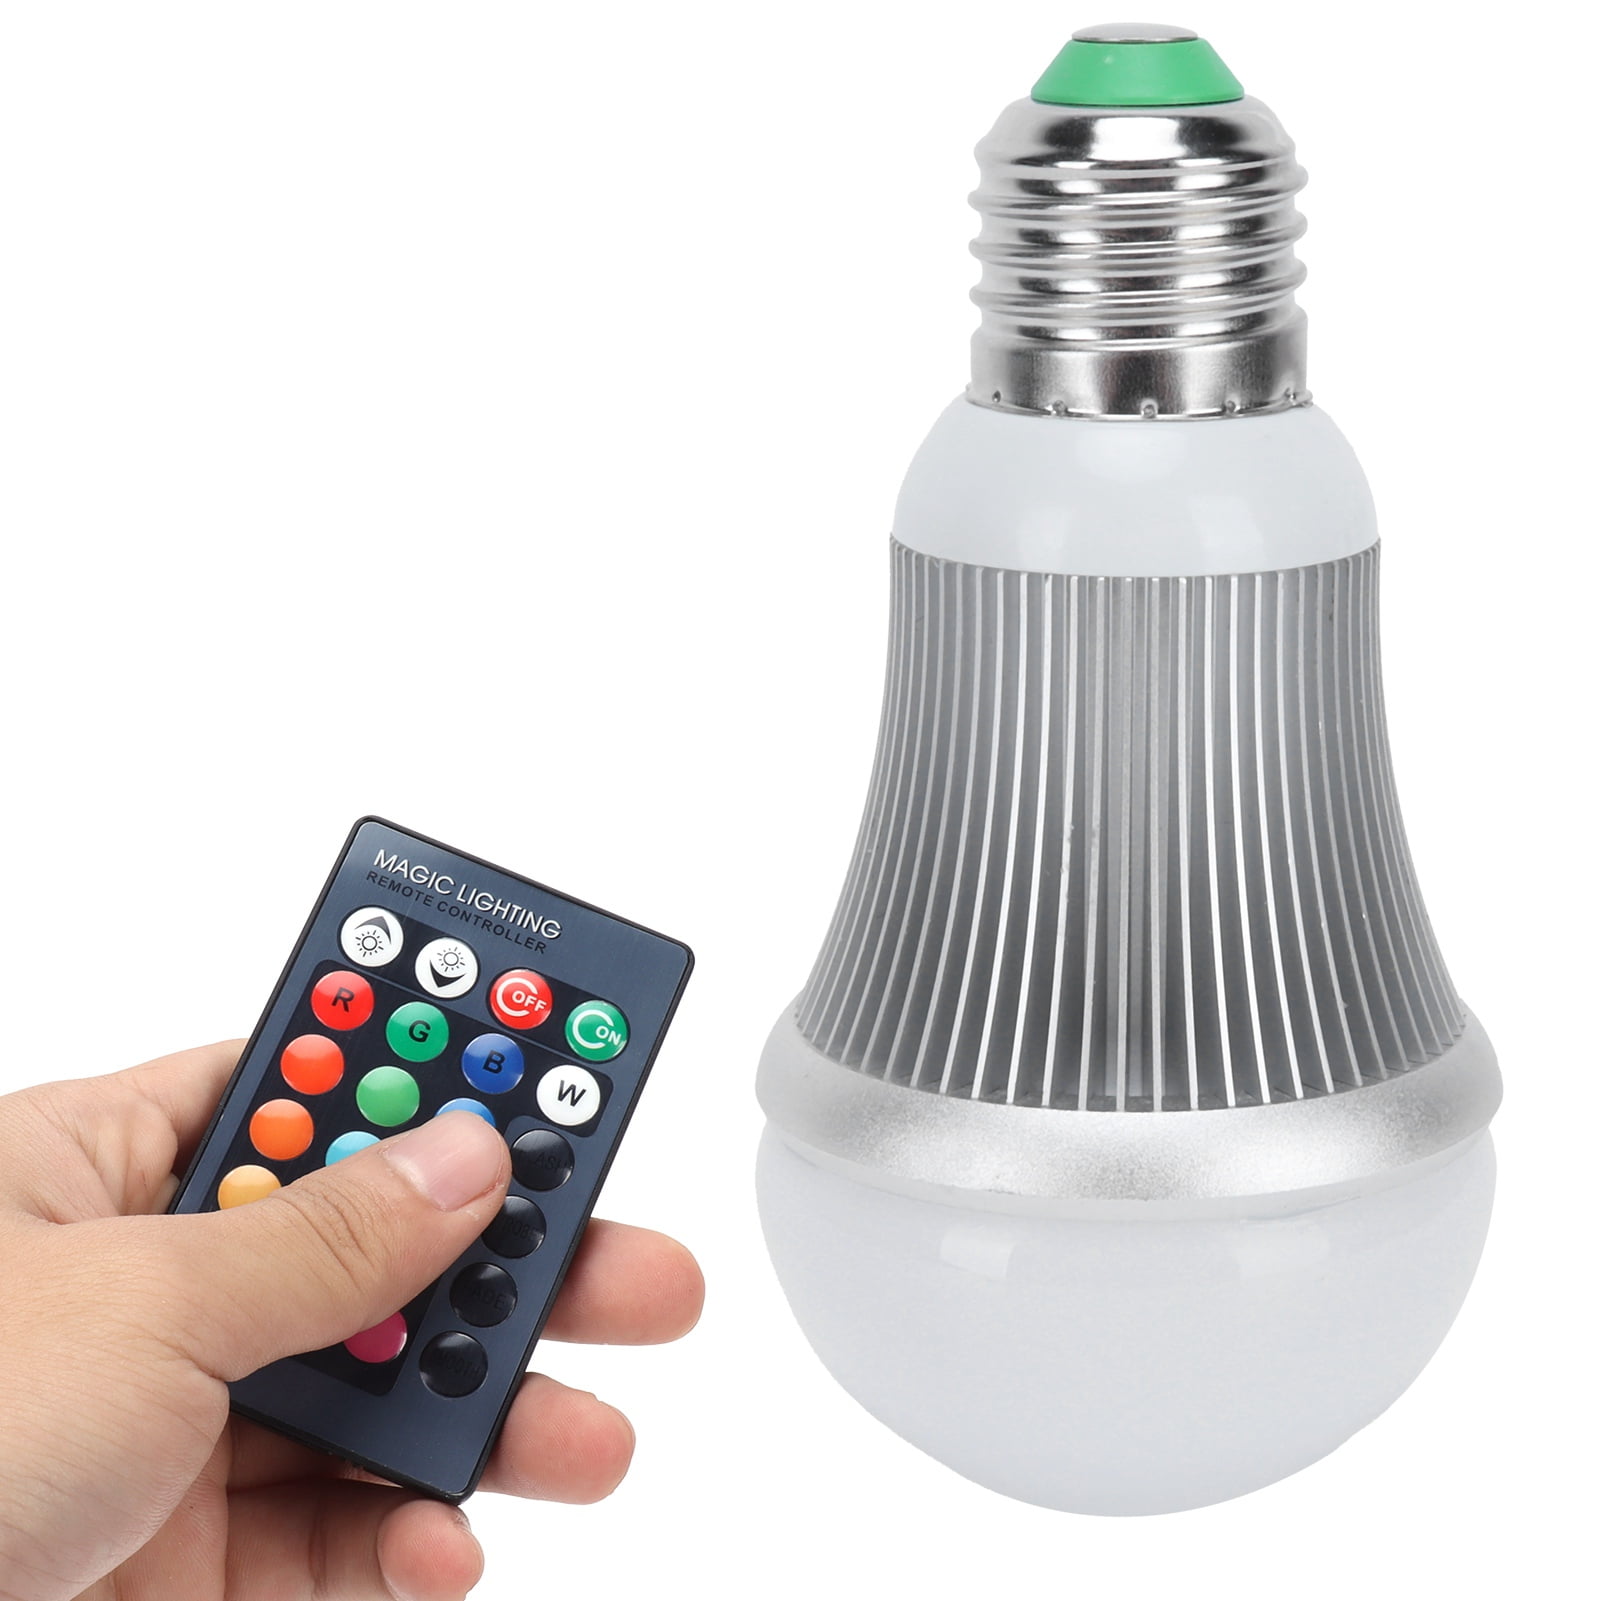 New LED Bulb Chandelier Flame Candle 24 Key Color Remote Control Light 